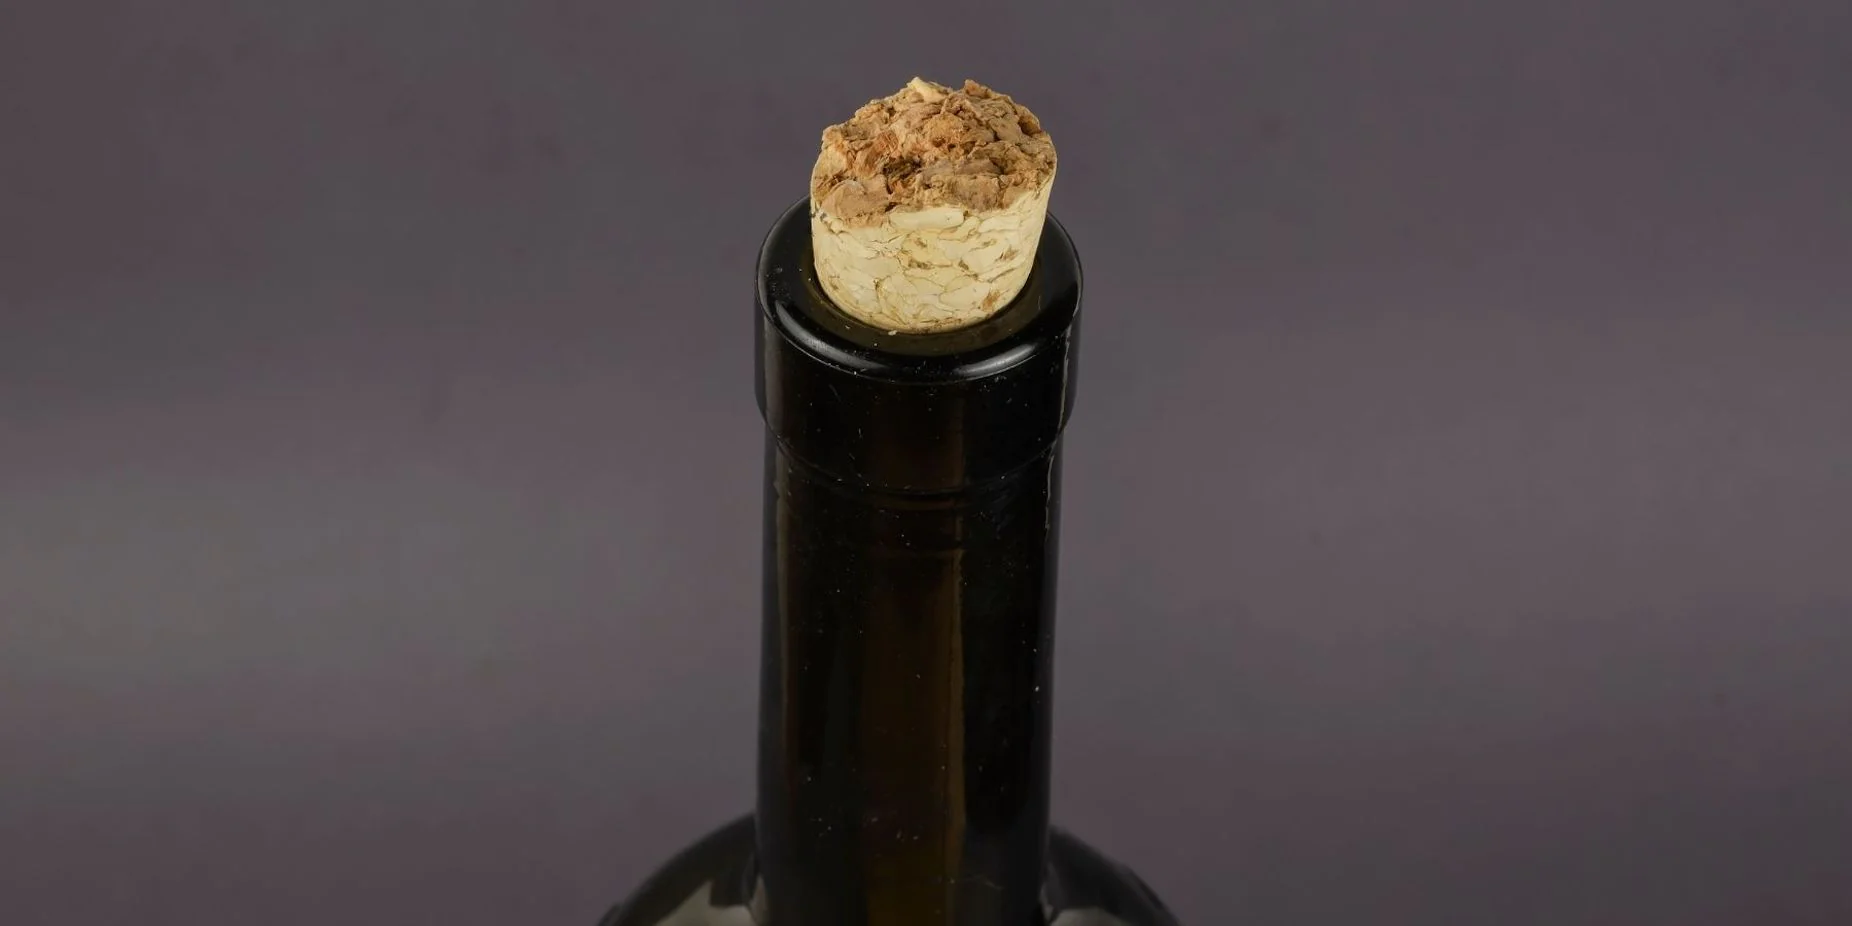 How To Get A Broken Cork Out Of A Wine Bottle Without A Corkscrew